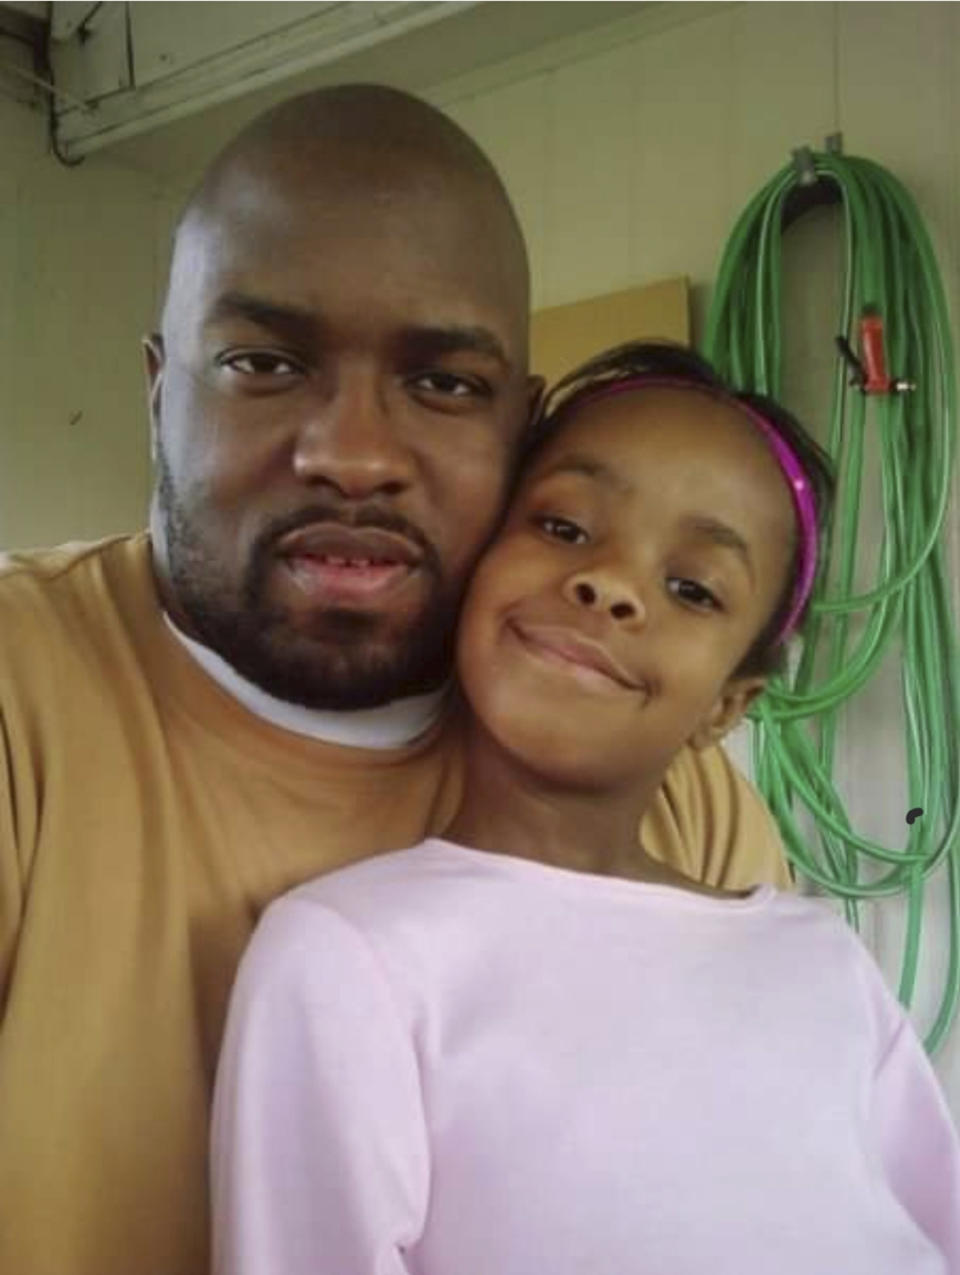 In this photo provided by Ray Montgomery, Six-year-old Jazzmen Montgomery sits next to her father, Ray Montgomery, in 2009. Texas inmate Gary Green is facing execution Tuesday, March 7, 2023, for drowning Jazzmen and fatally stabbing her mother, Lovetta Armstead, his estranged wife, in 2009. (Ray Montgomery via AP)